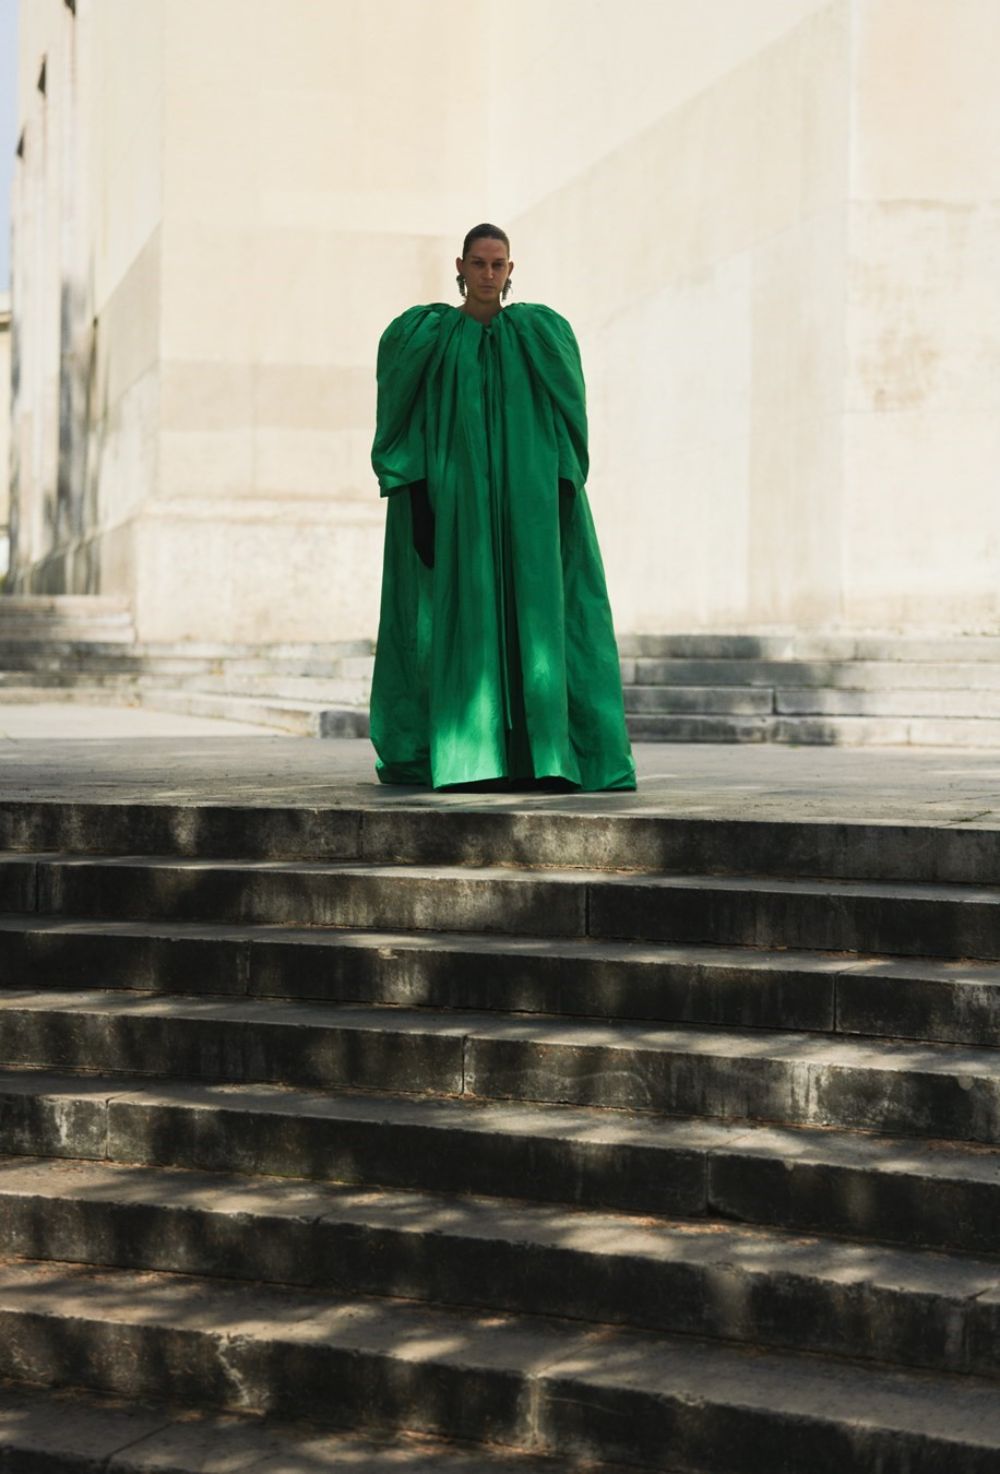 Balenciaga Couture by Ola Rindal for Another Magazine Fall-Winter 2021